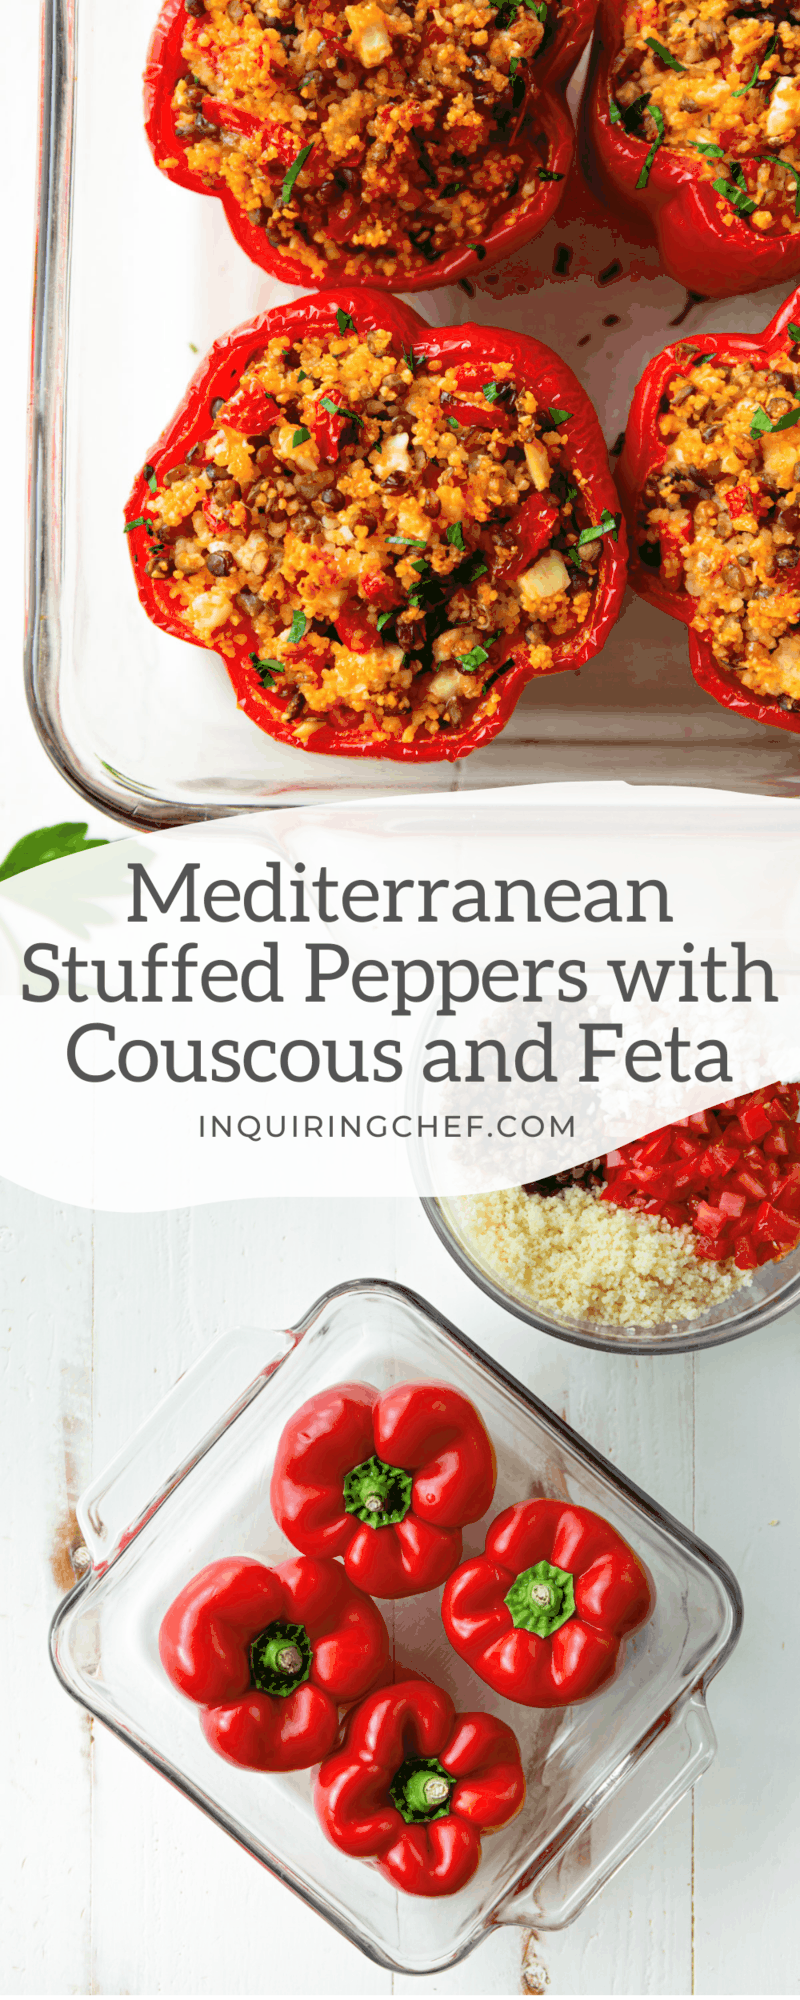 Mediterranean Stuffed Peppers with Couscous and Feta